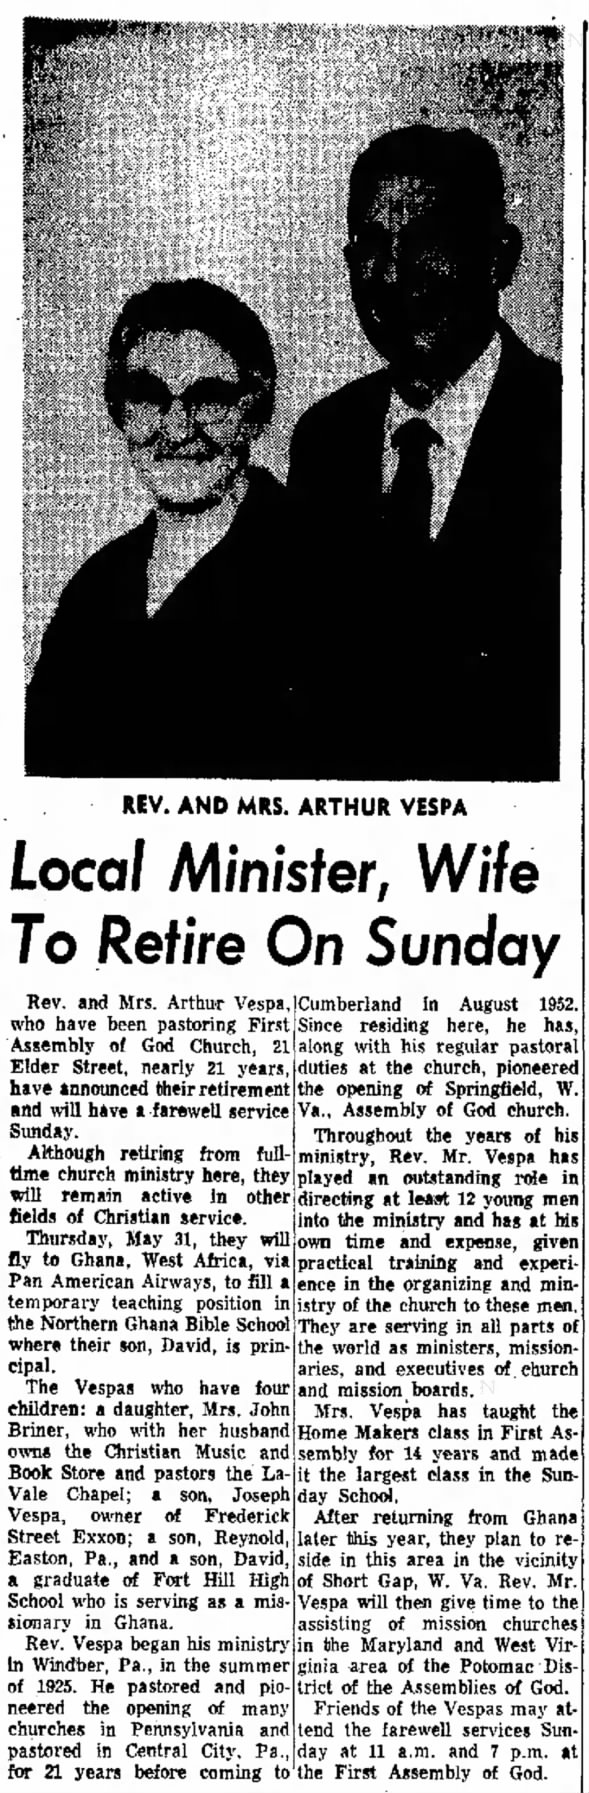 Local Minister, Wife to Retire on Sunday - Cumberland News - 23 May 1973 p26